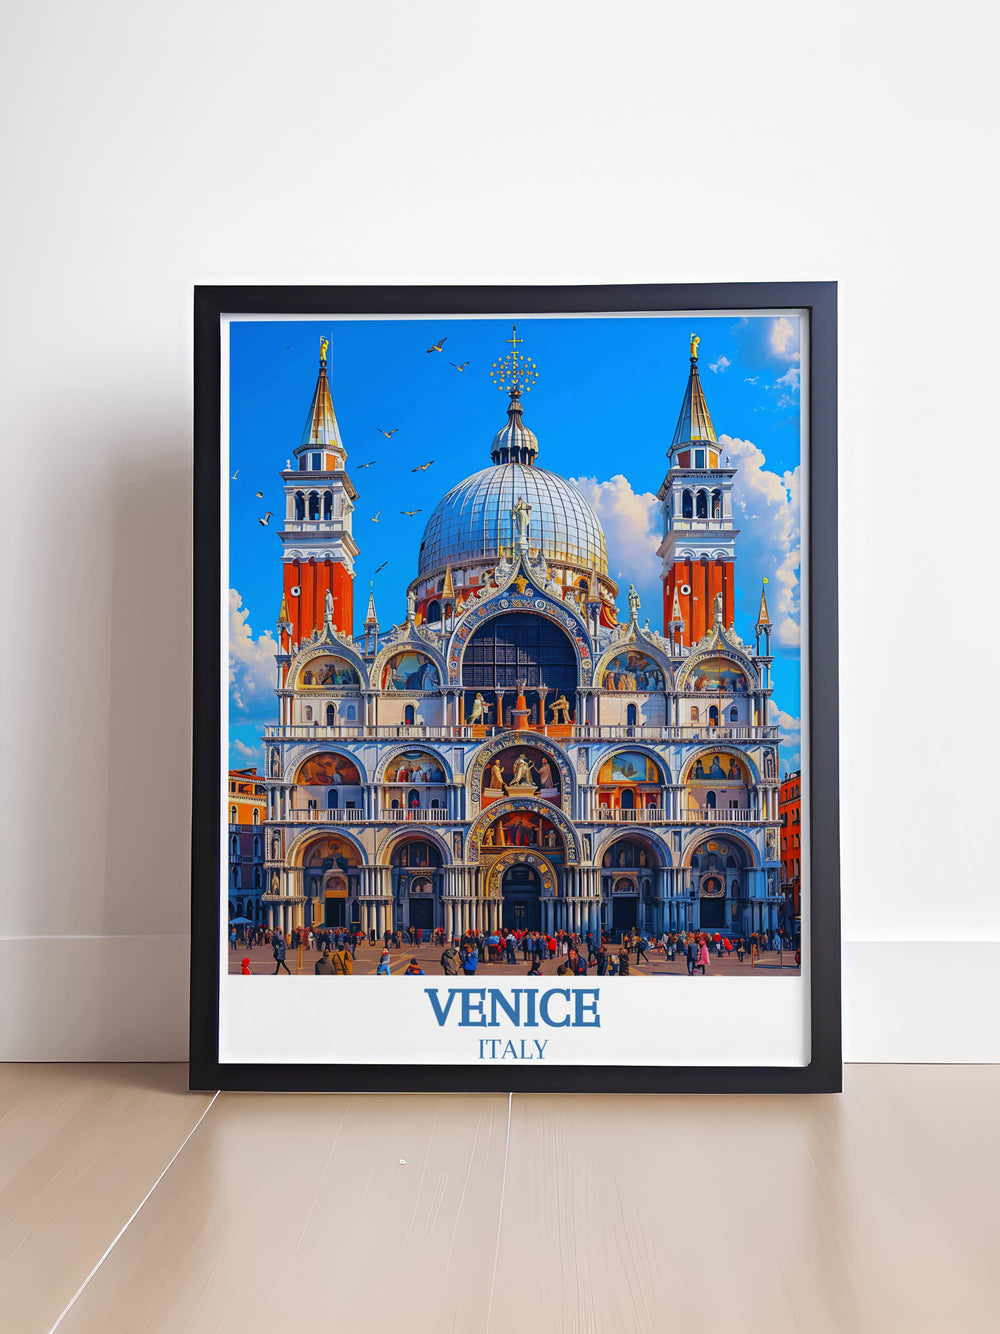 Stunning travel poster of Venices Grand Canal featuring gondolas gliding through the serene waterways, with the Rialto Bridge in the background, evoking the romantic allure and timeless charm of this enchanting city, ideal for travel themed decor.